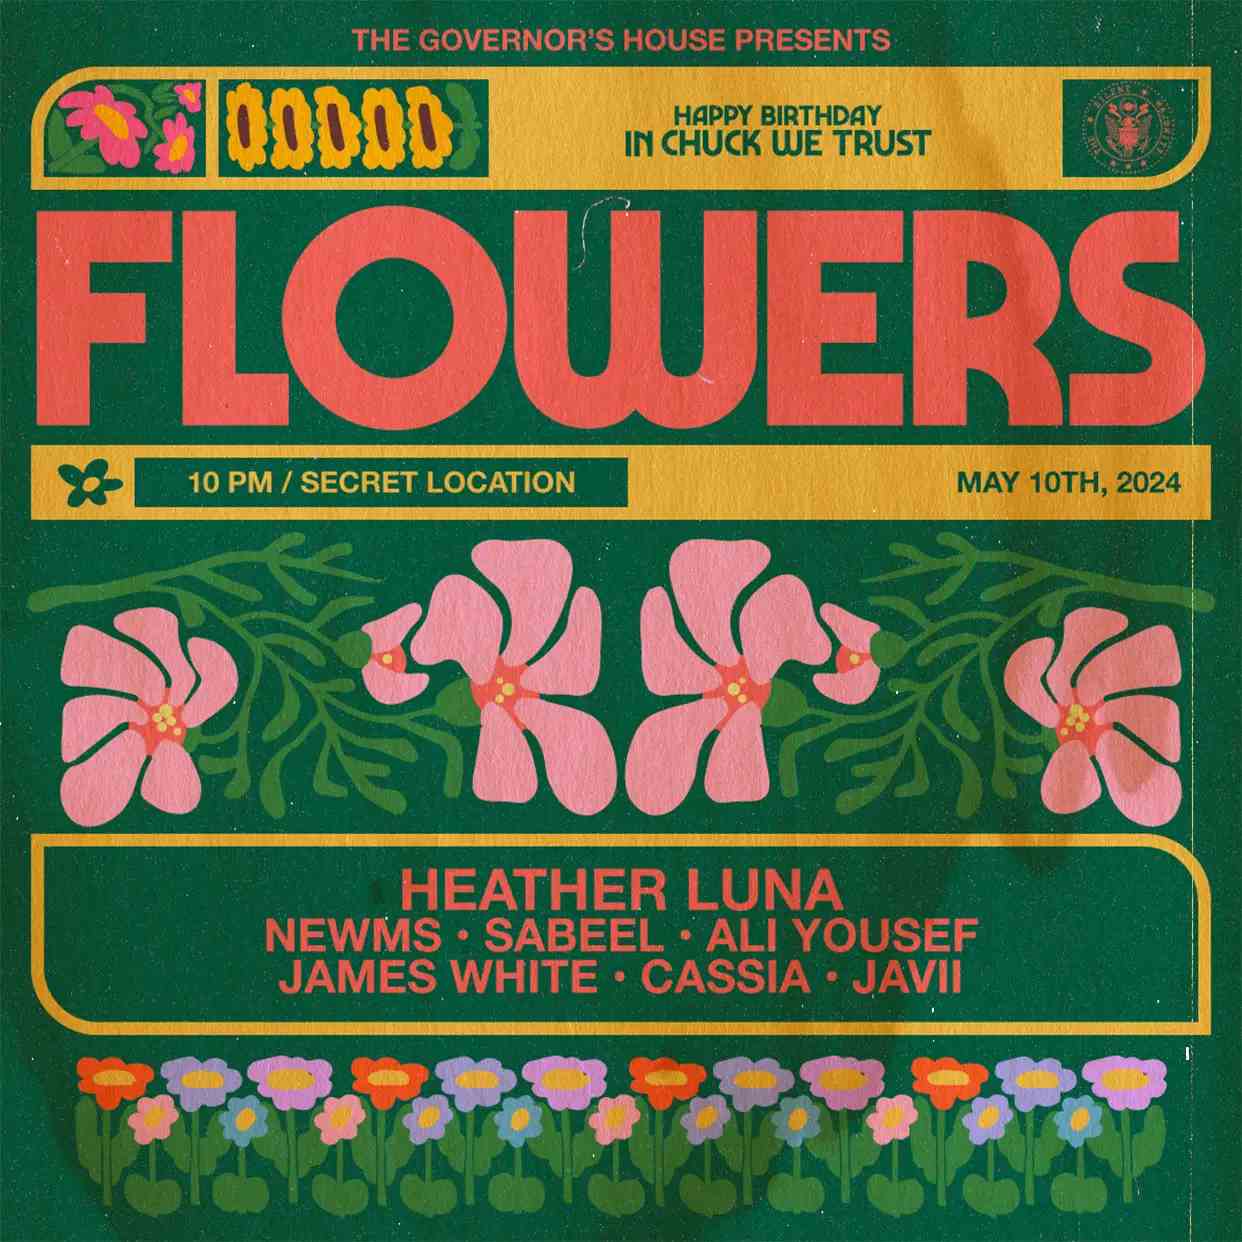 THE GOVERNOR'S HOUSE PRESENTS: FLOWERS event flyer